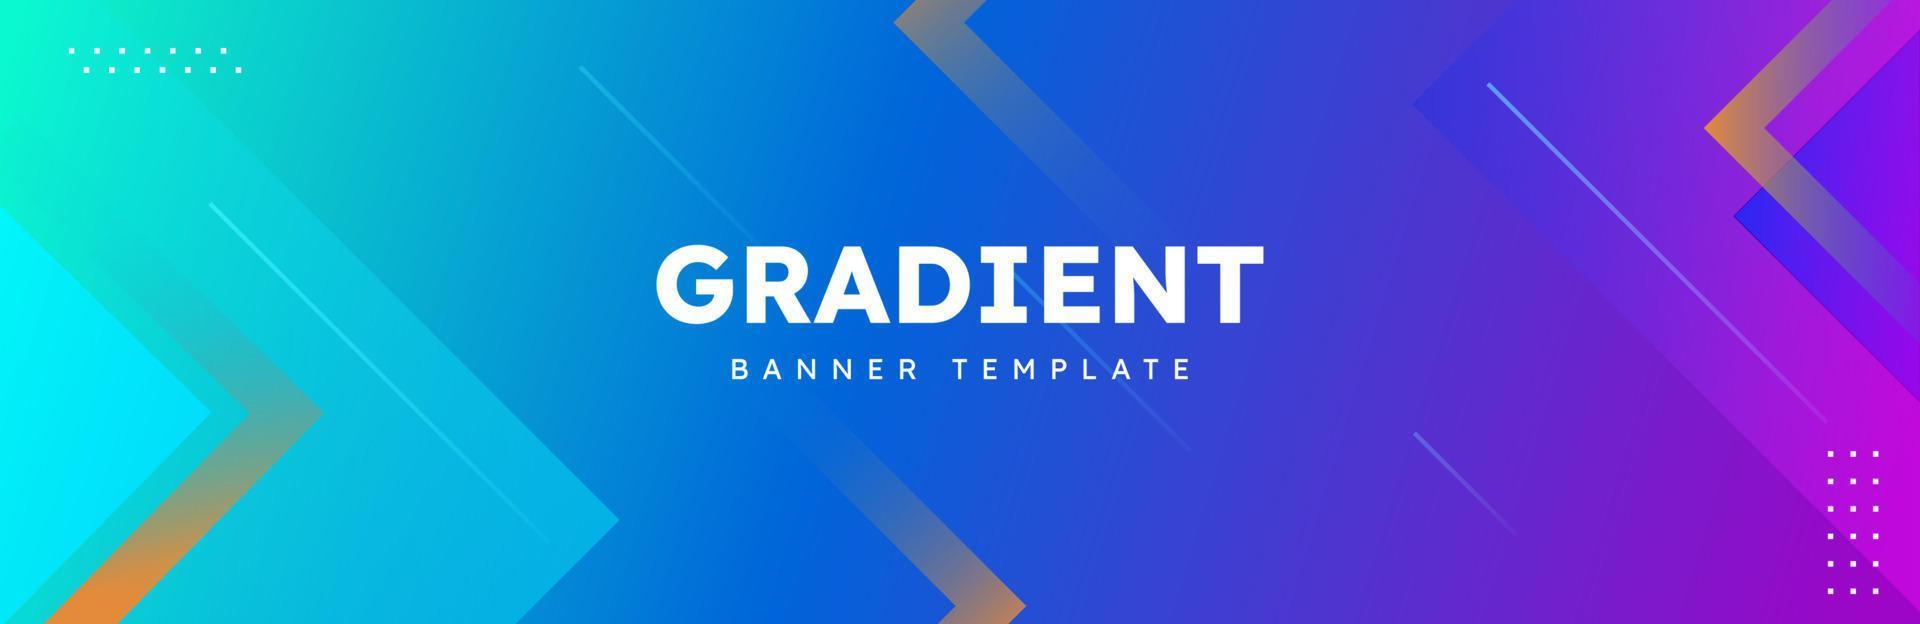 Colorful template banner with gradient color vector